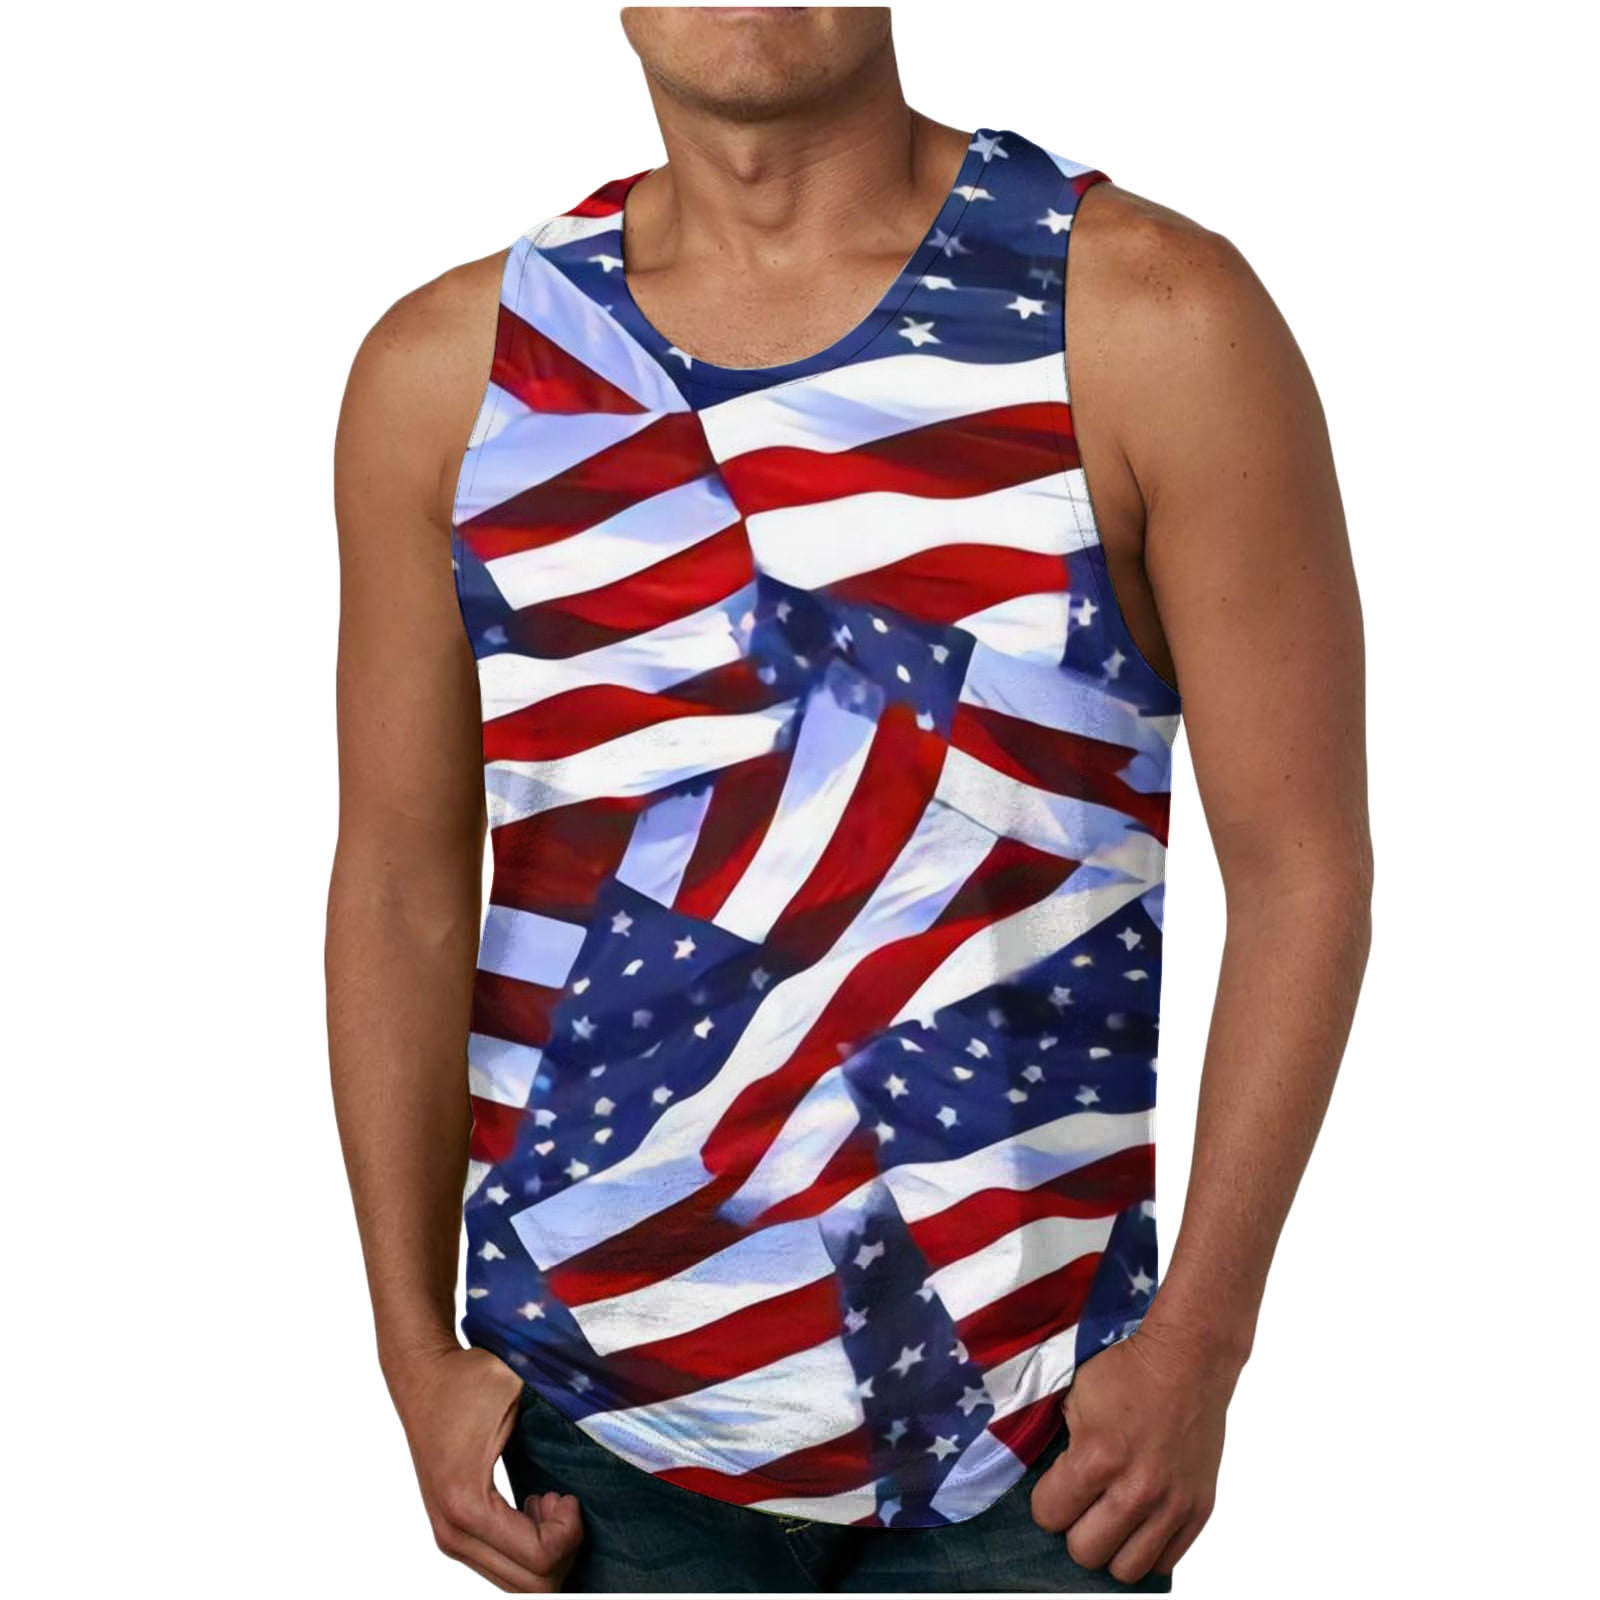 Big and Tall Tank Tops for Men 4th of July,Men's Casual Tank Tops ...